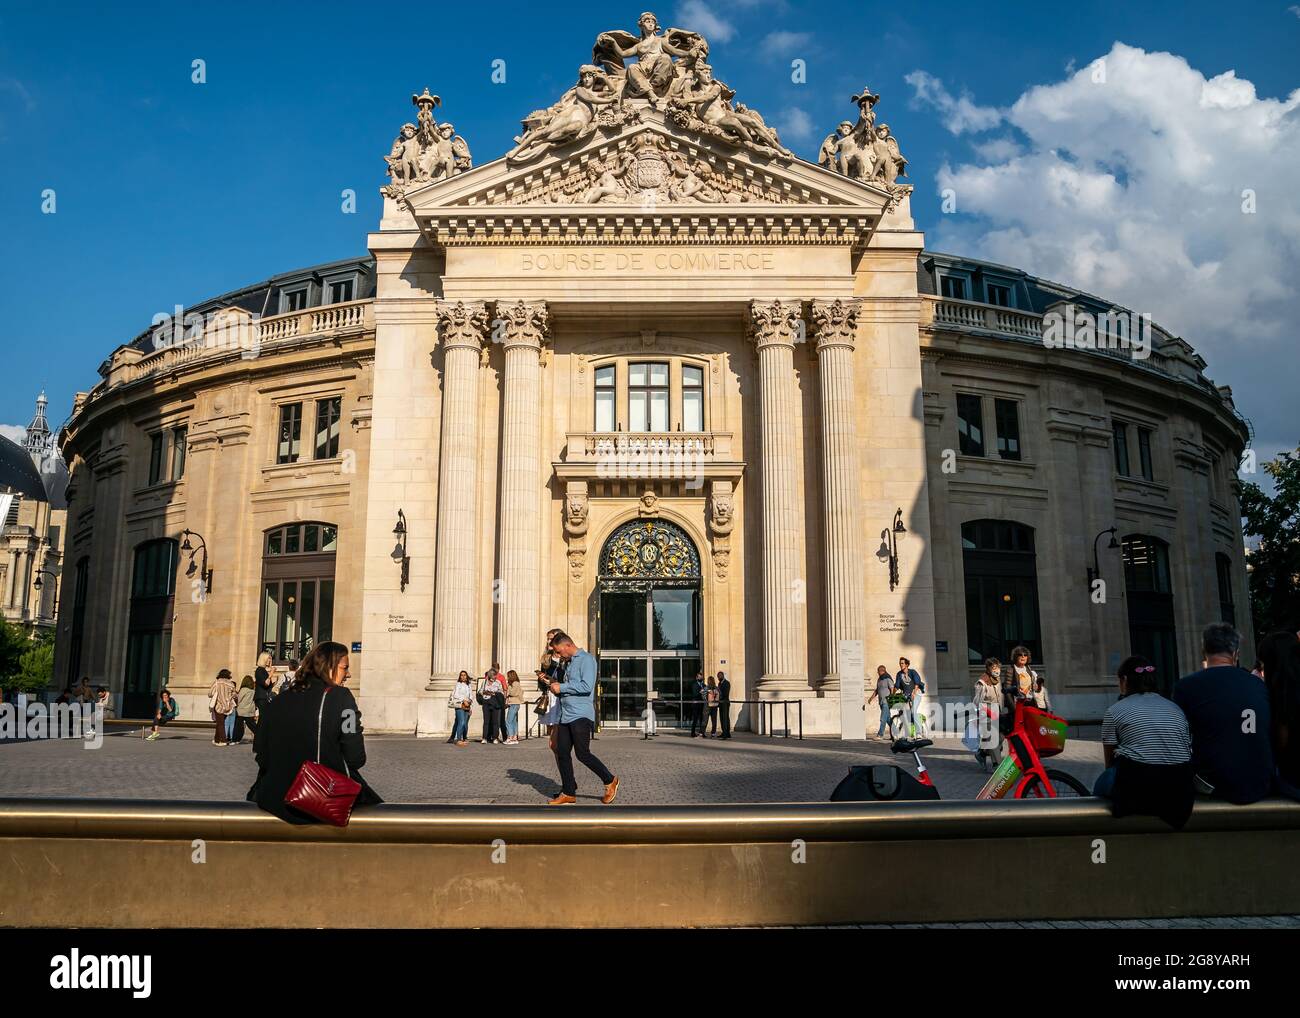 The Bourse de commerce is a building in Paris, originally used as a place to negotiate the trade of grain and other commodities Stock Photo